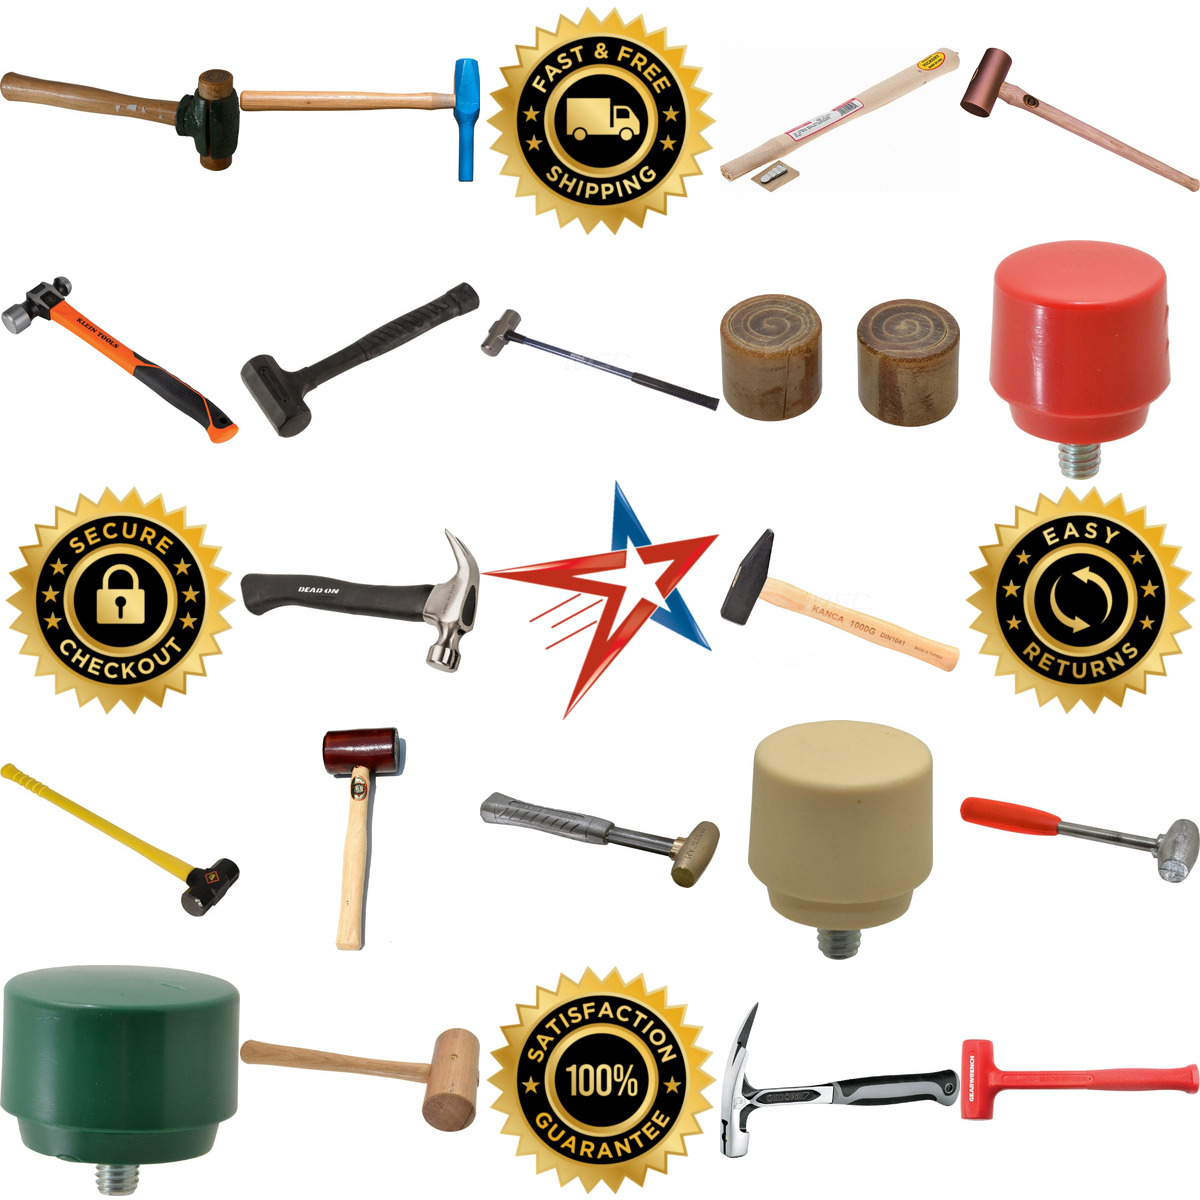 A selection of Hammers and Mallets products on GoVets